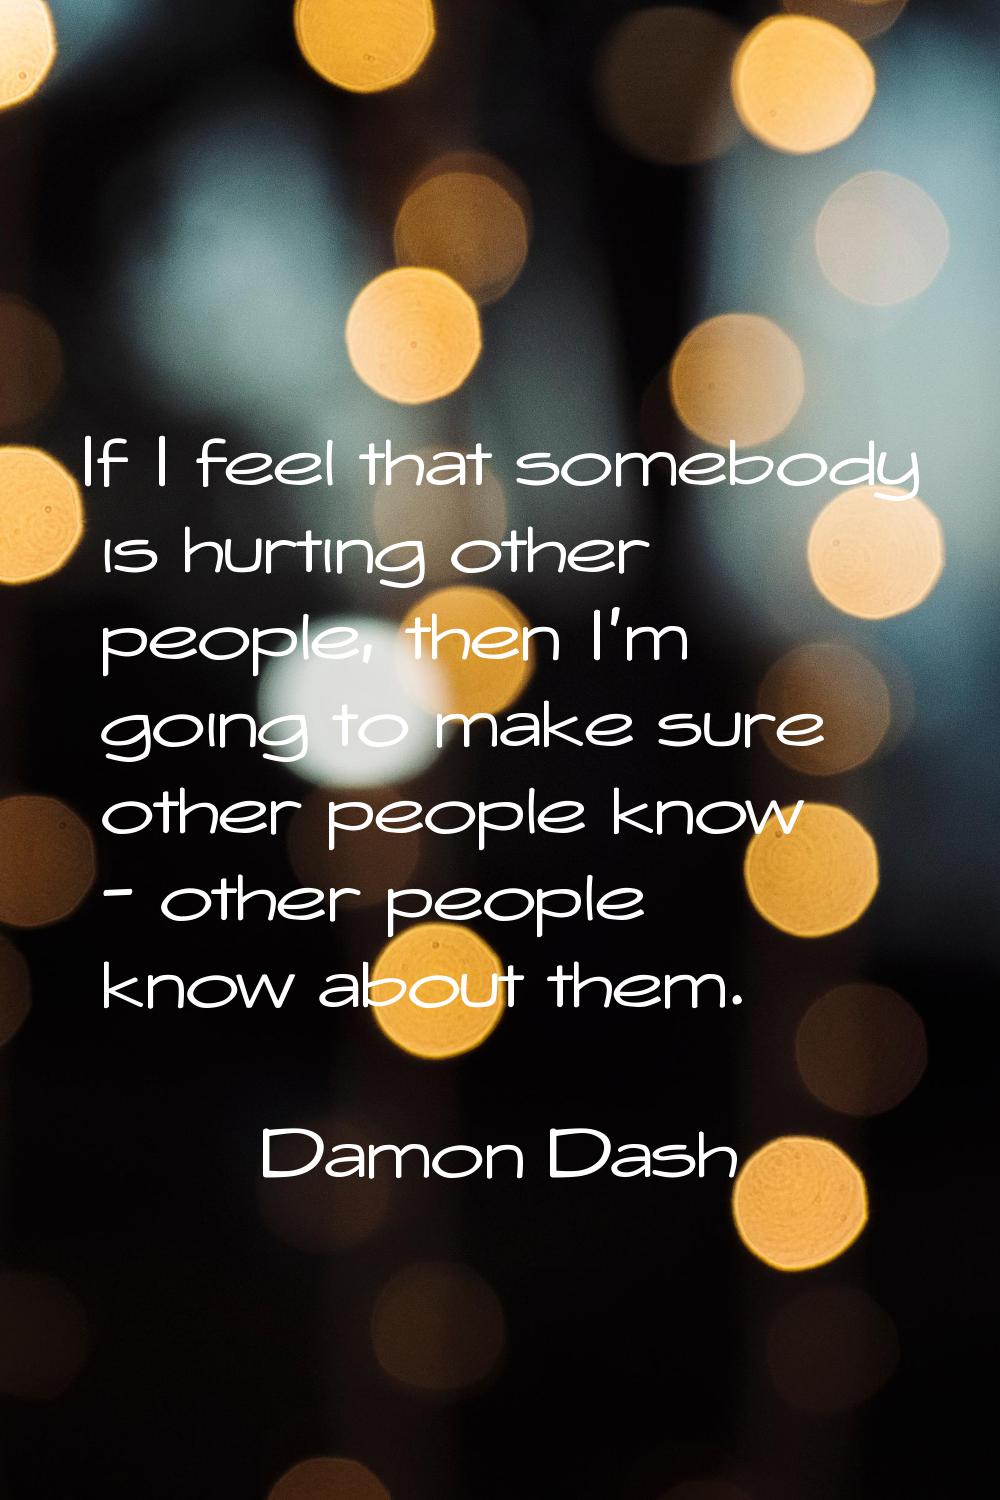 If I feel that somebody is hurting other people, then I'm going to make sure other people know - ot